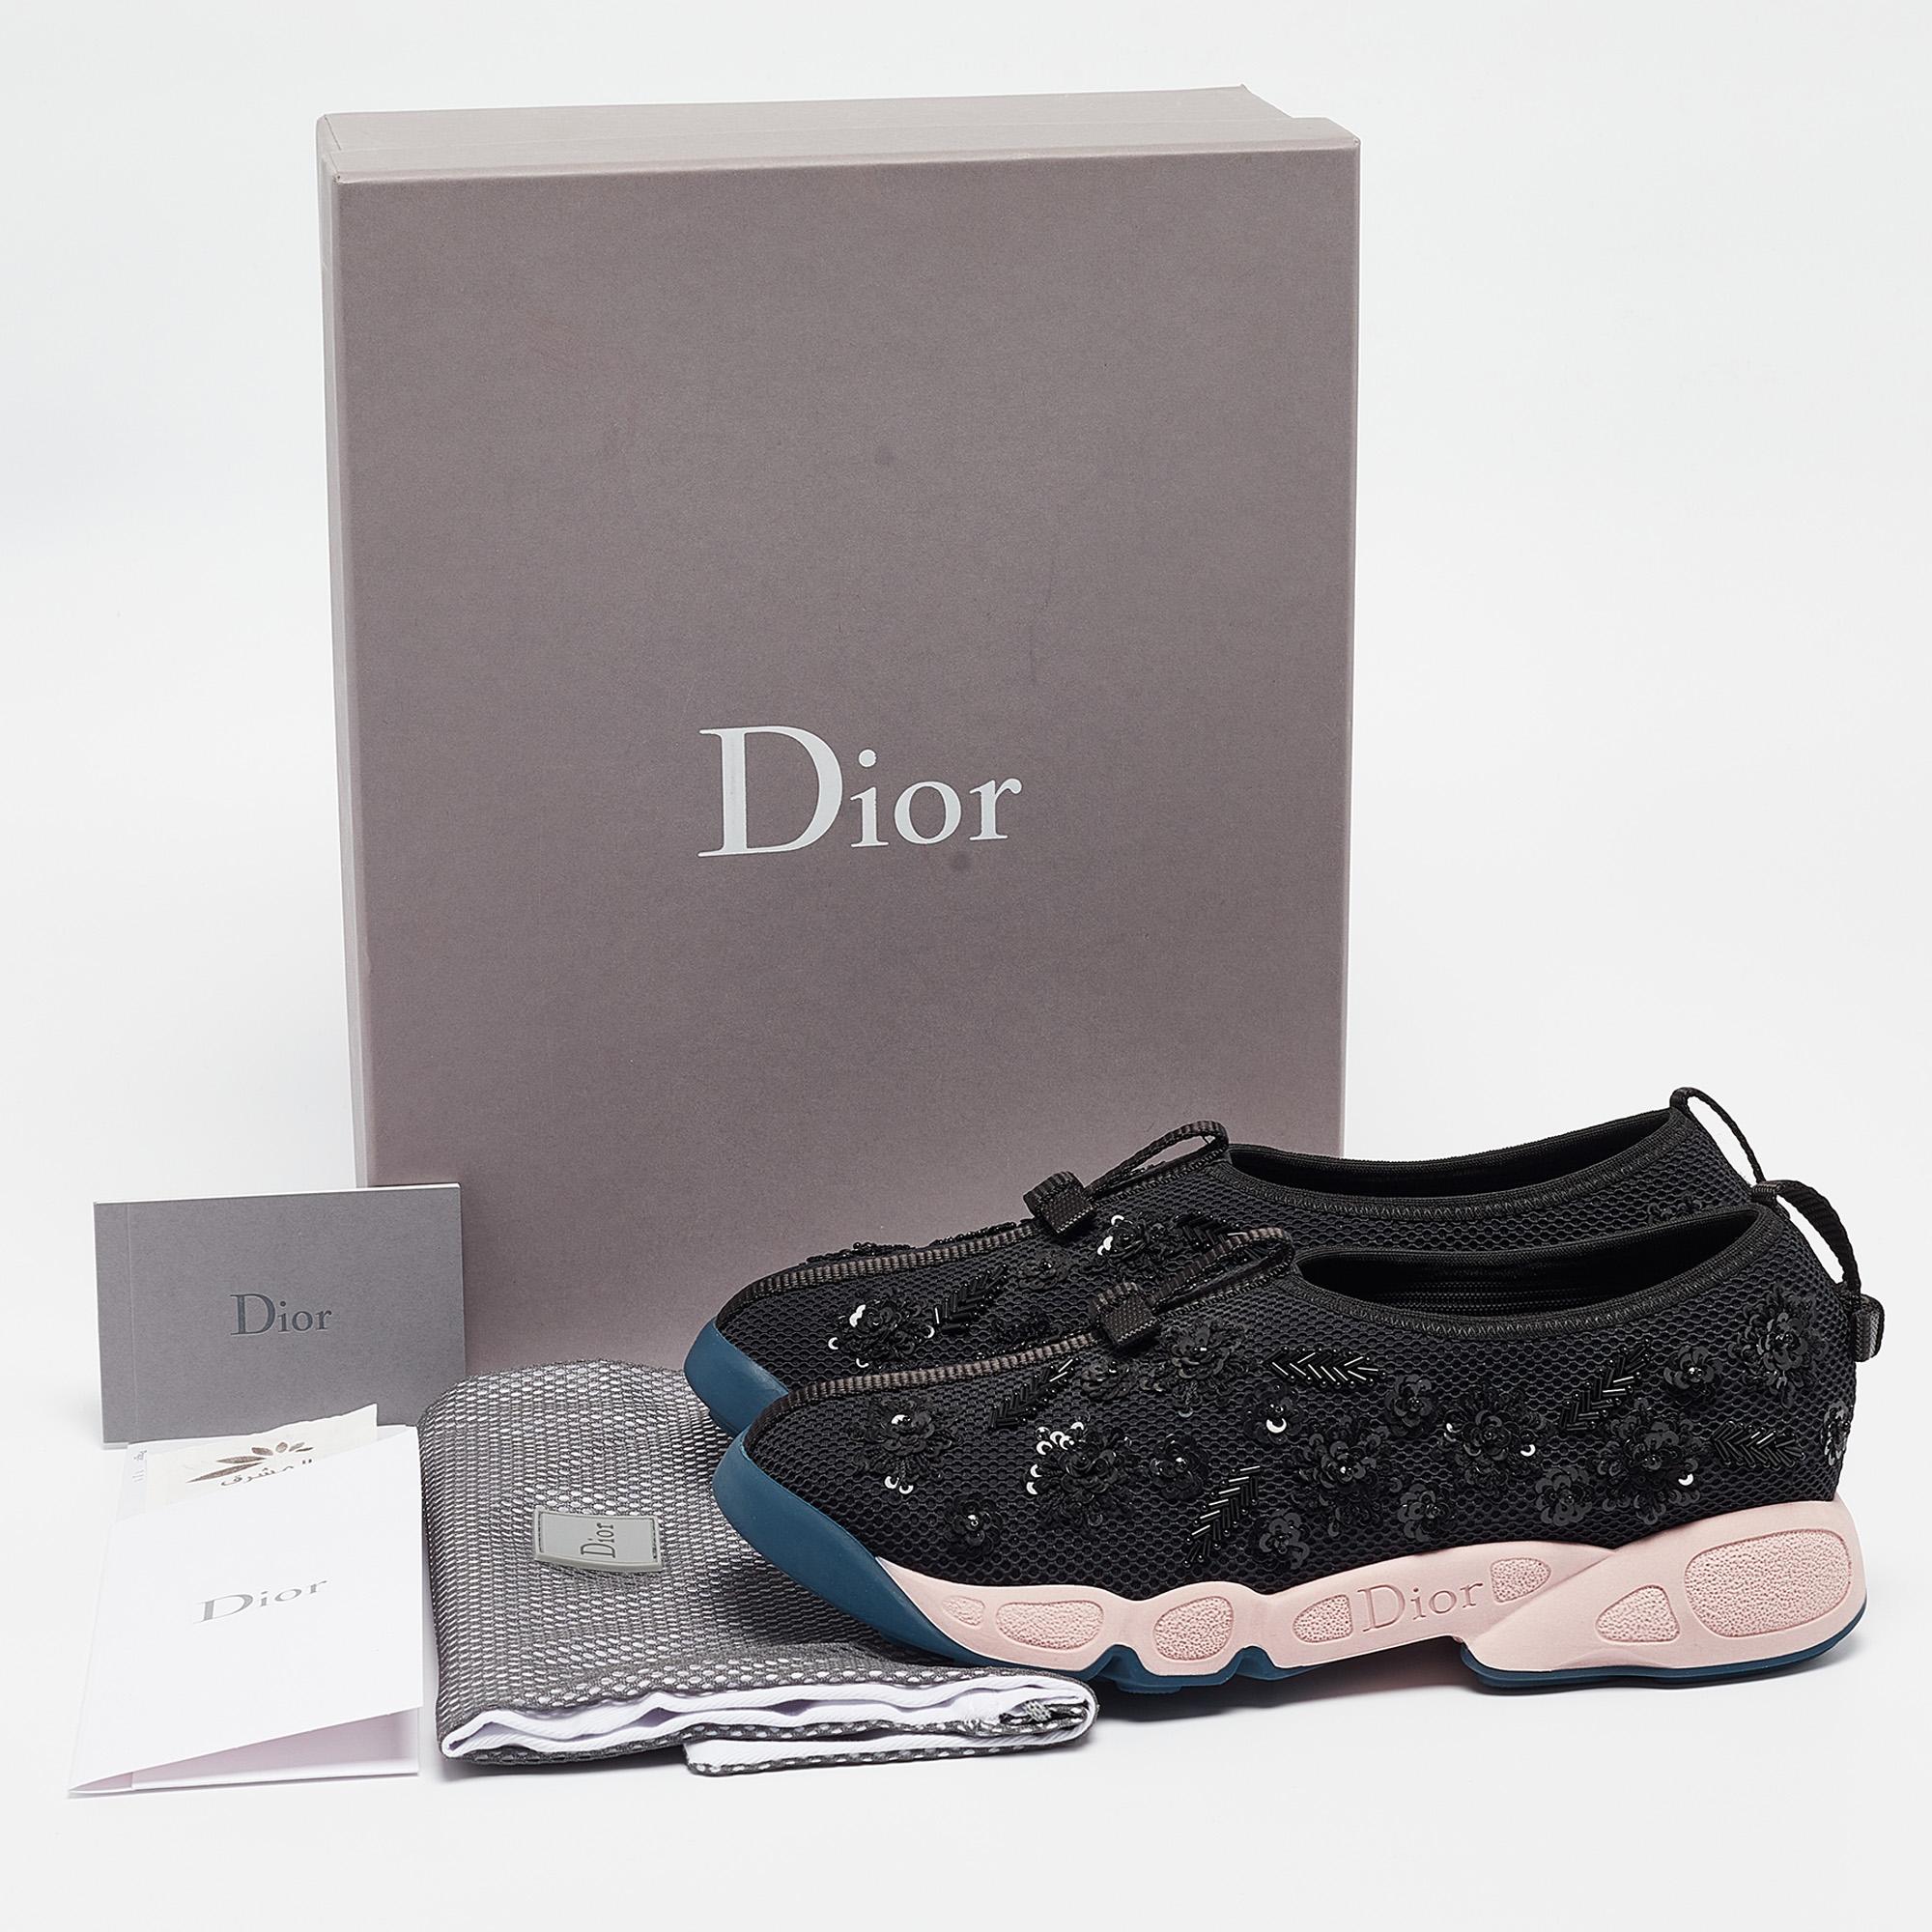 Dior Black/Pink Nylon Fusion Embellished Sneakers Size 36.5 For Sale 1